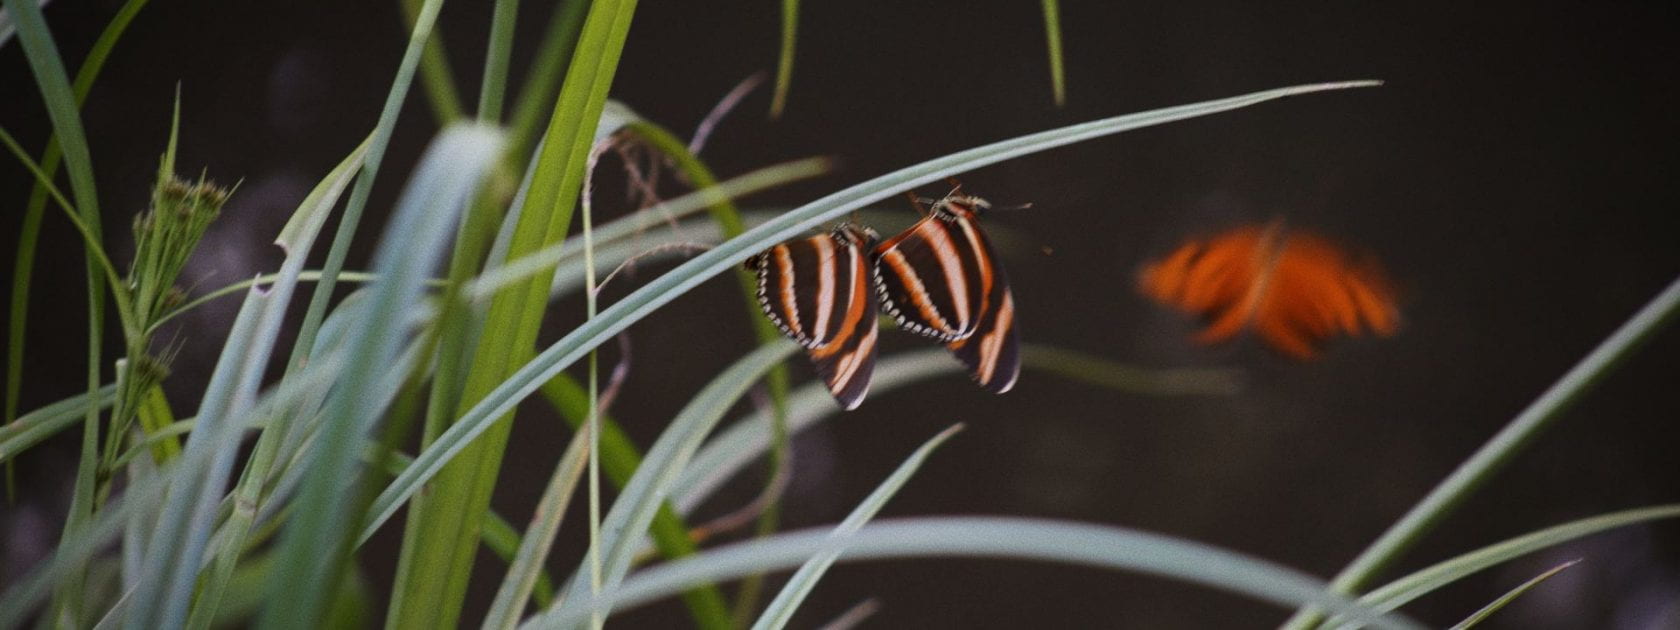 Image shows some grasses and two butterflies in bright orange and black colours.